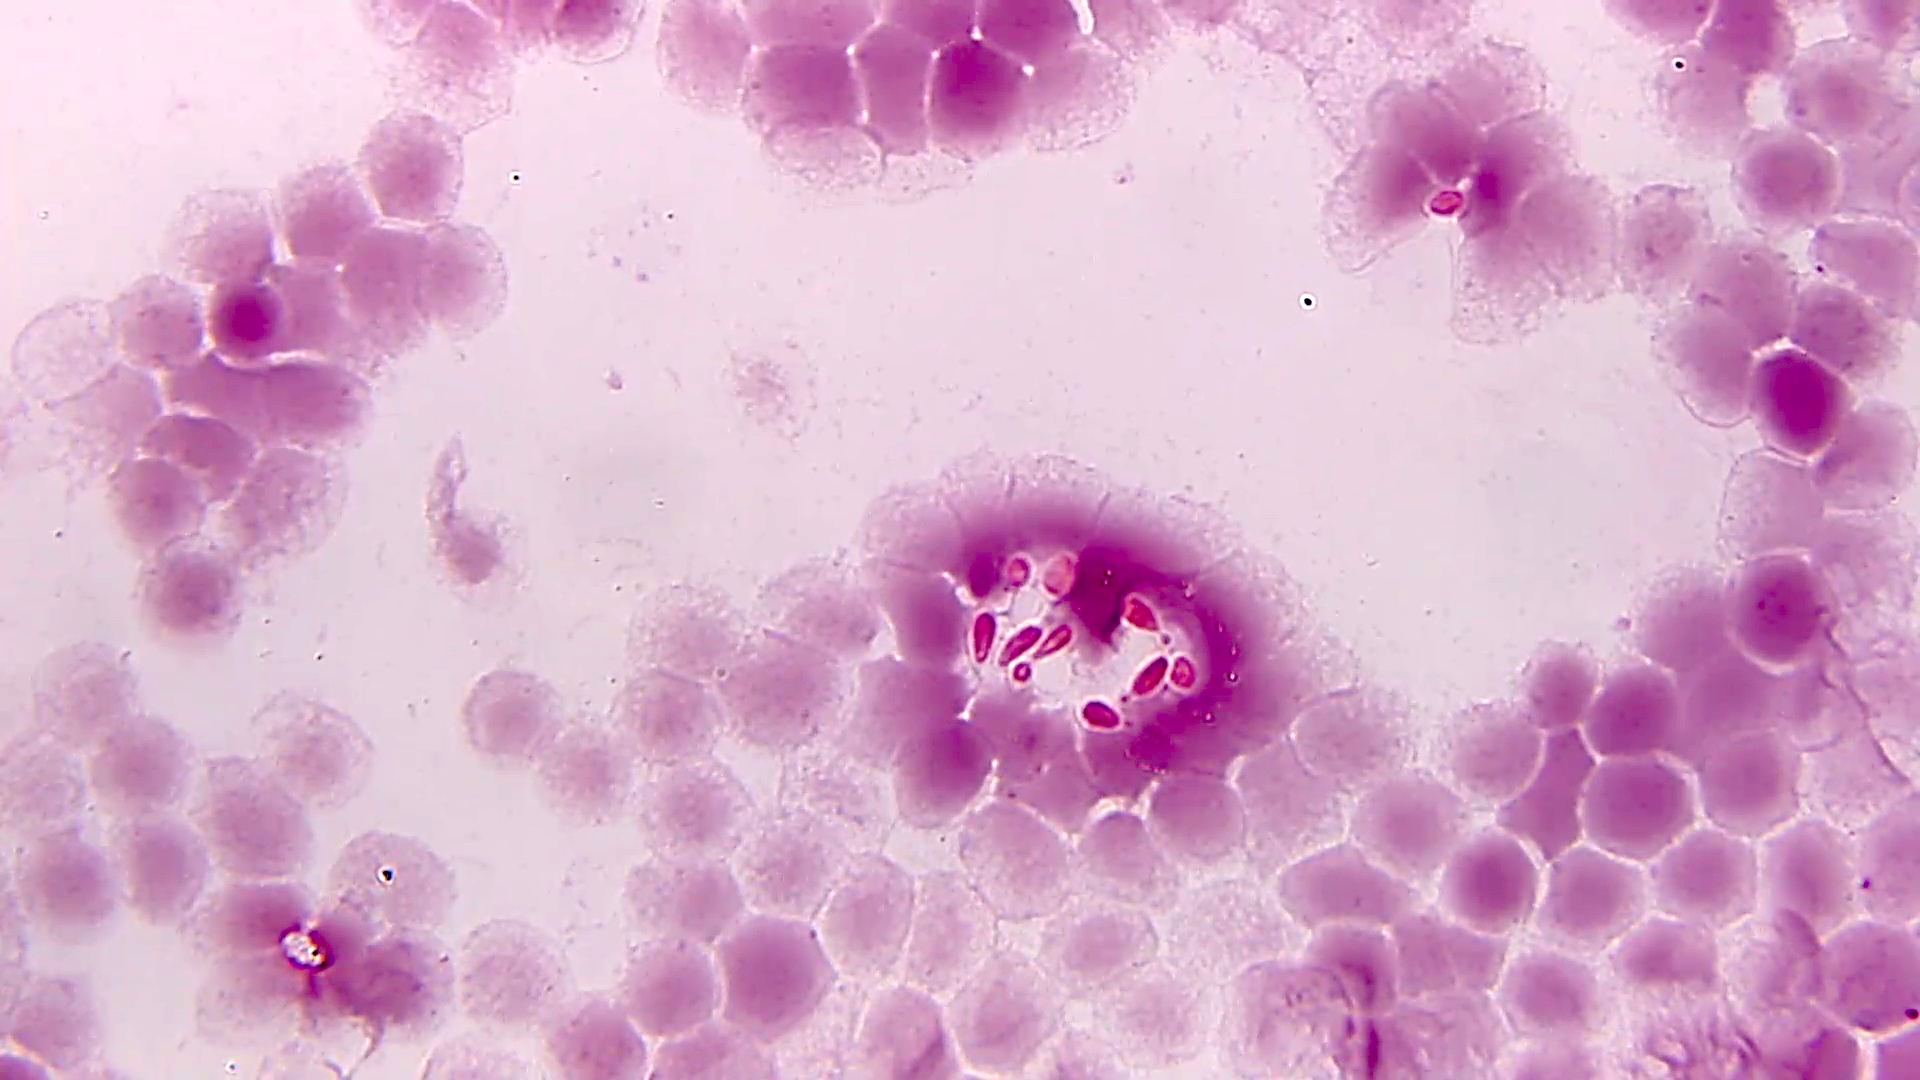 Uniform clustered yeasts